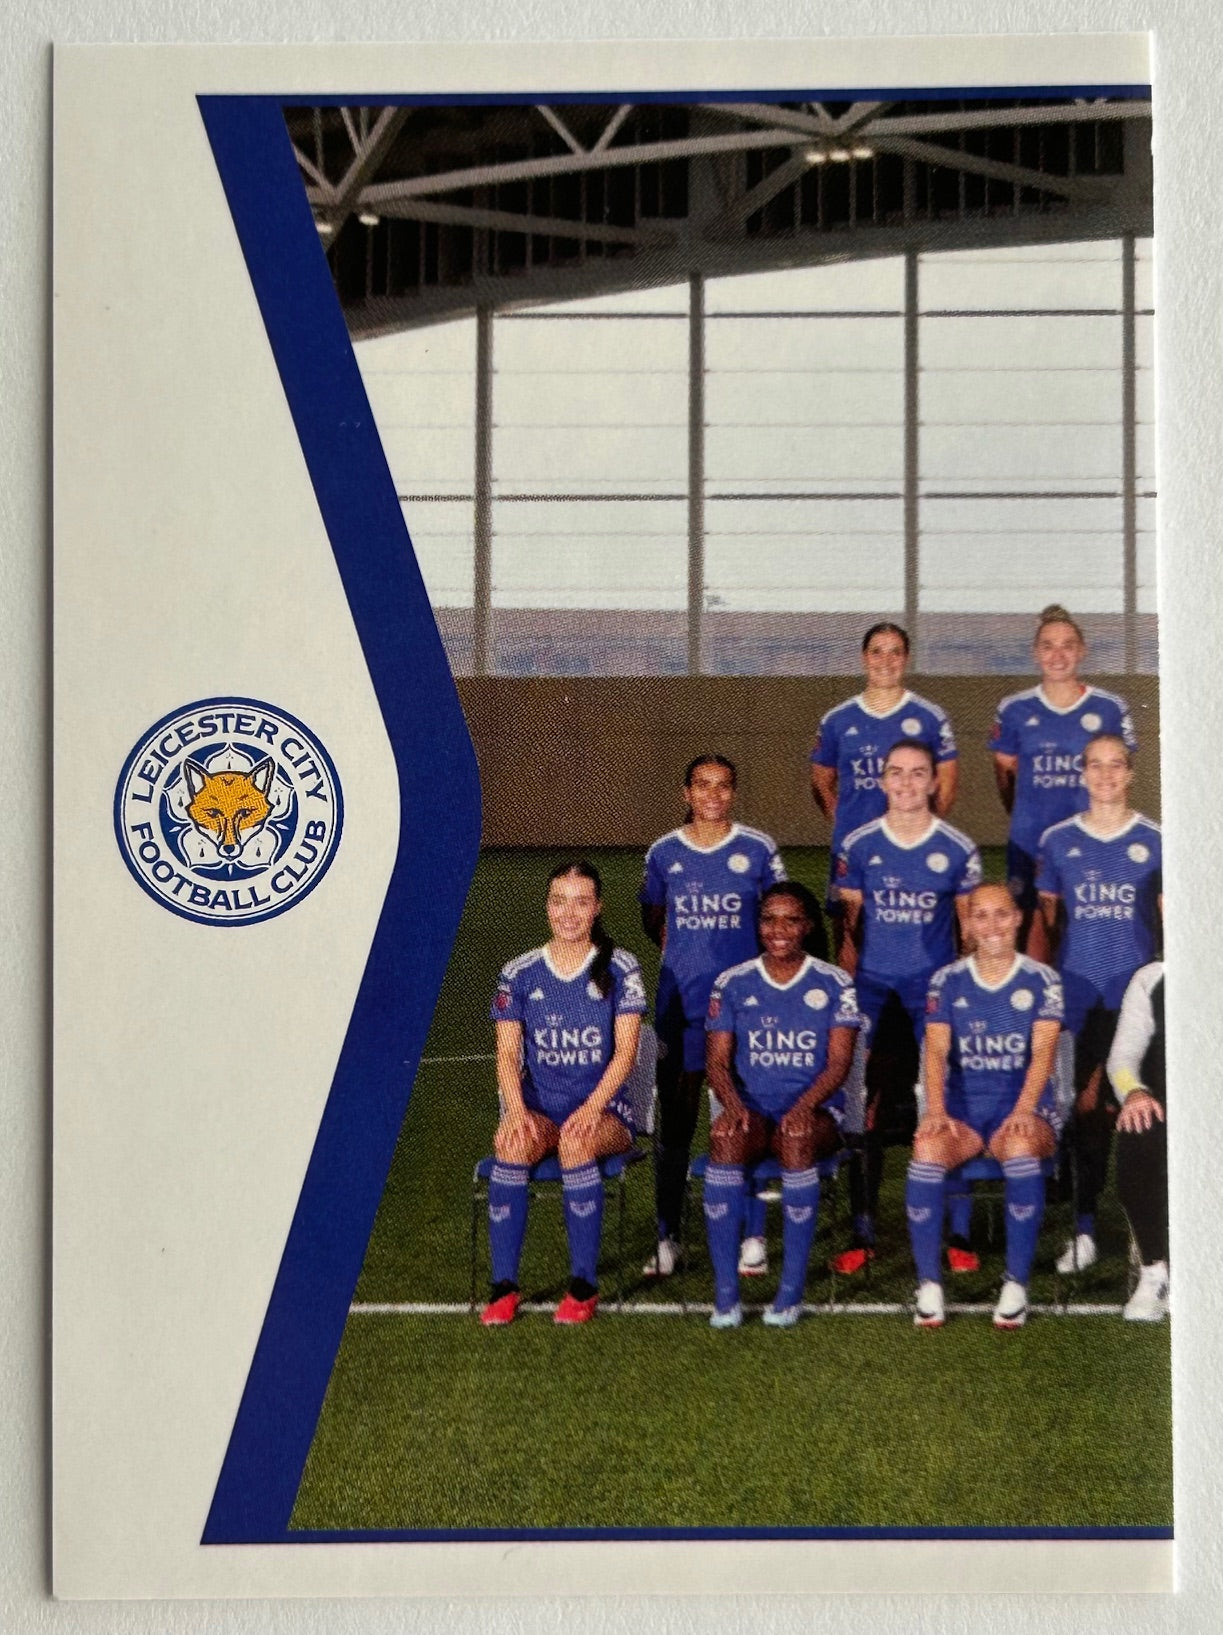 Panini Barclays Women's Super League 2024 - Single SQUAD SNAPSHOT (LEICESTER CITY & LIVERPOOL) Stickers (#32 - #37)